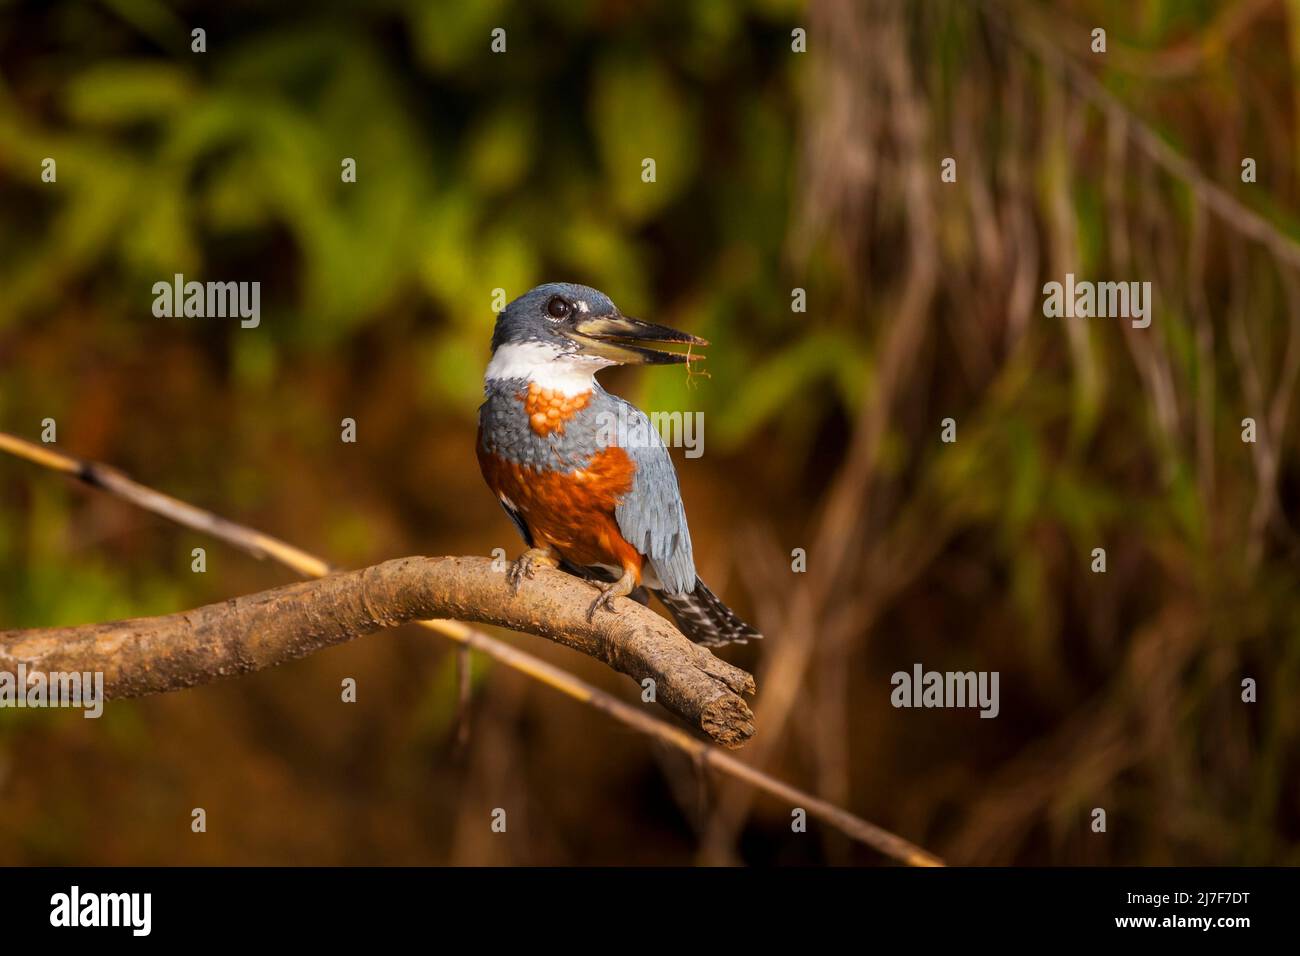 Ringed Kingfisher,  Megaceryle torquata, on a branch above Rio Chagres, Soberania national park, Colon province, Republic of Panama, Central America. Stock Photo